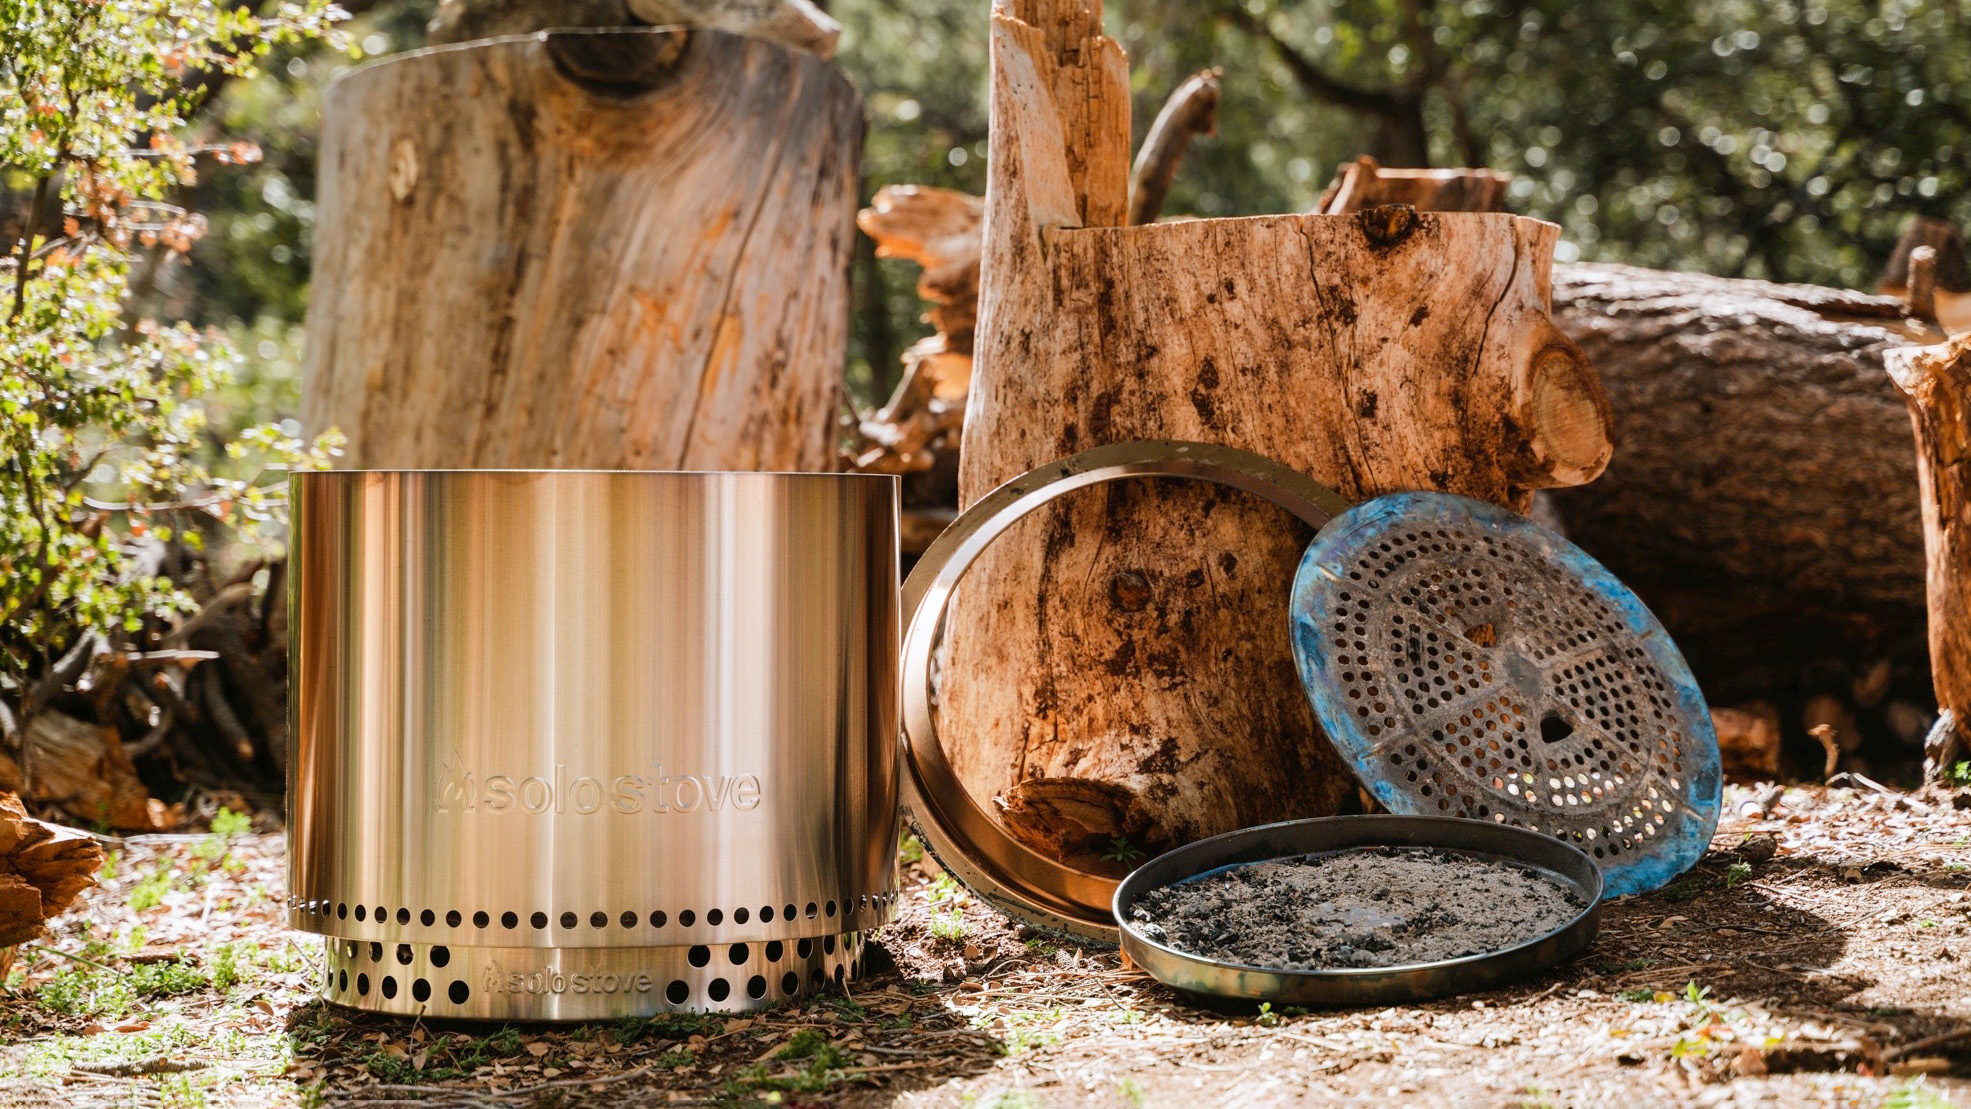 Solo Stove's sitewide coupons give you up to an extra $100 off